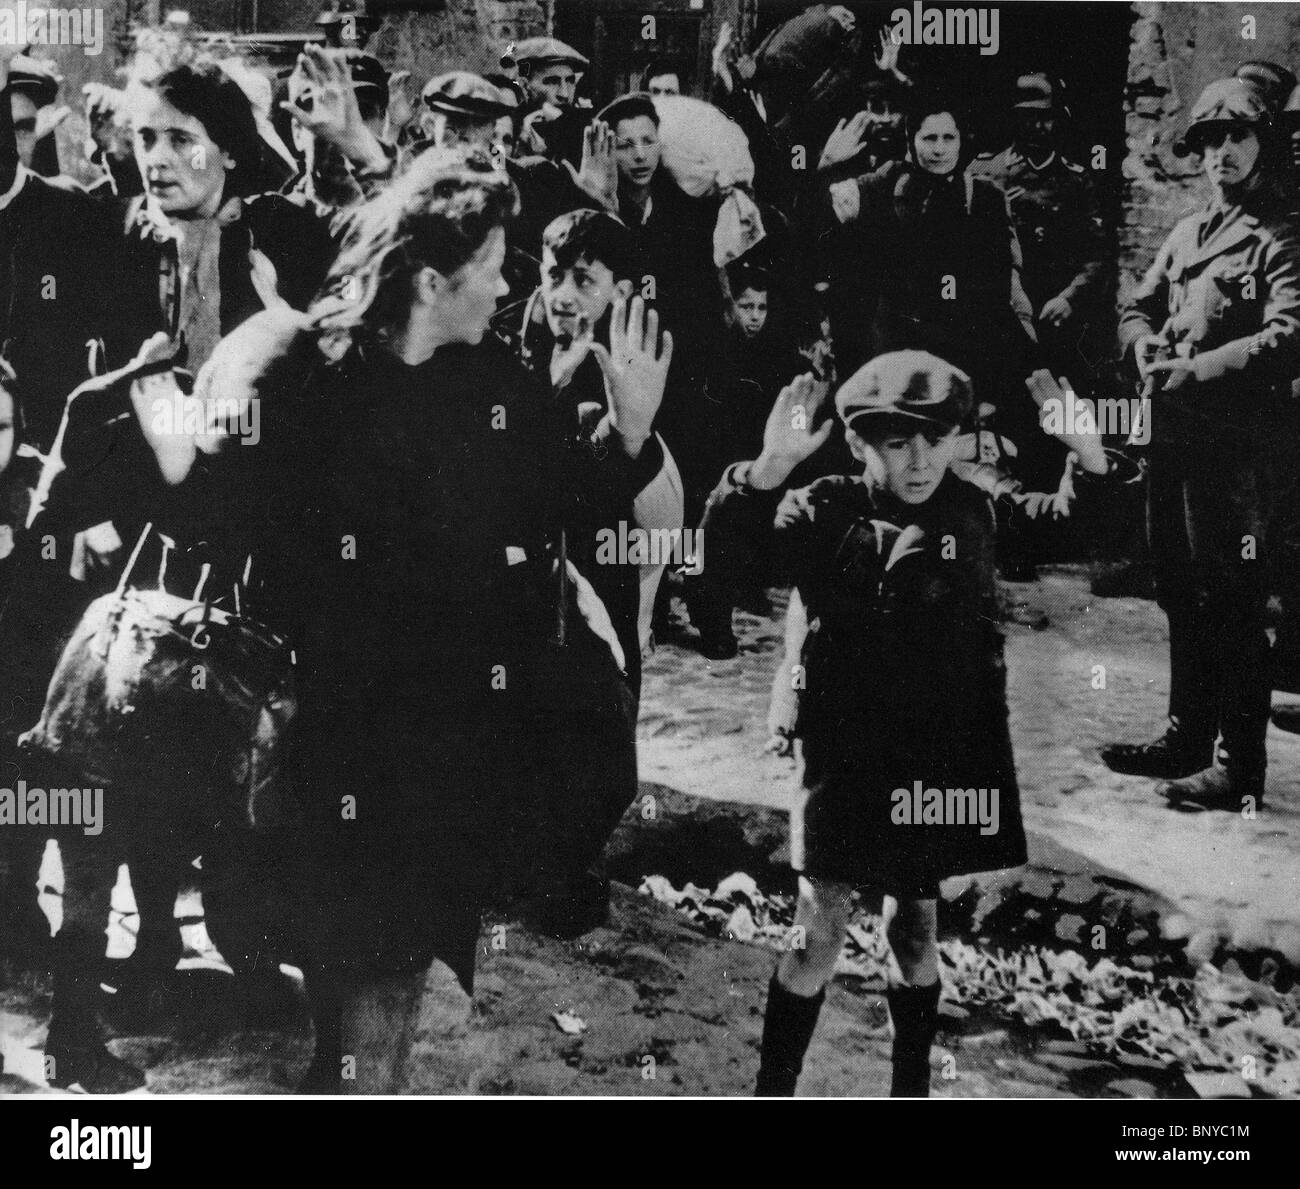 WARSAW GHETTO  German troops forcibly removing  Jewish occupants of the Warsaw Ghetto in April 1943 Stock Photo